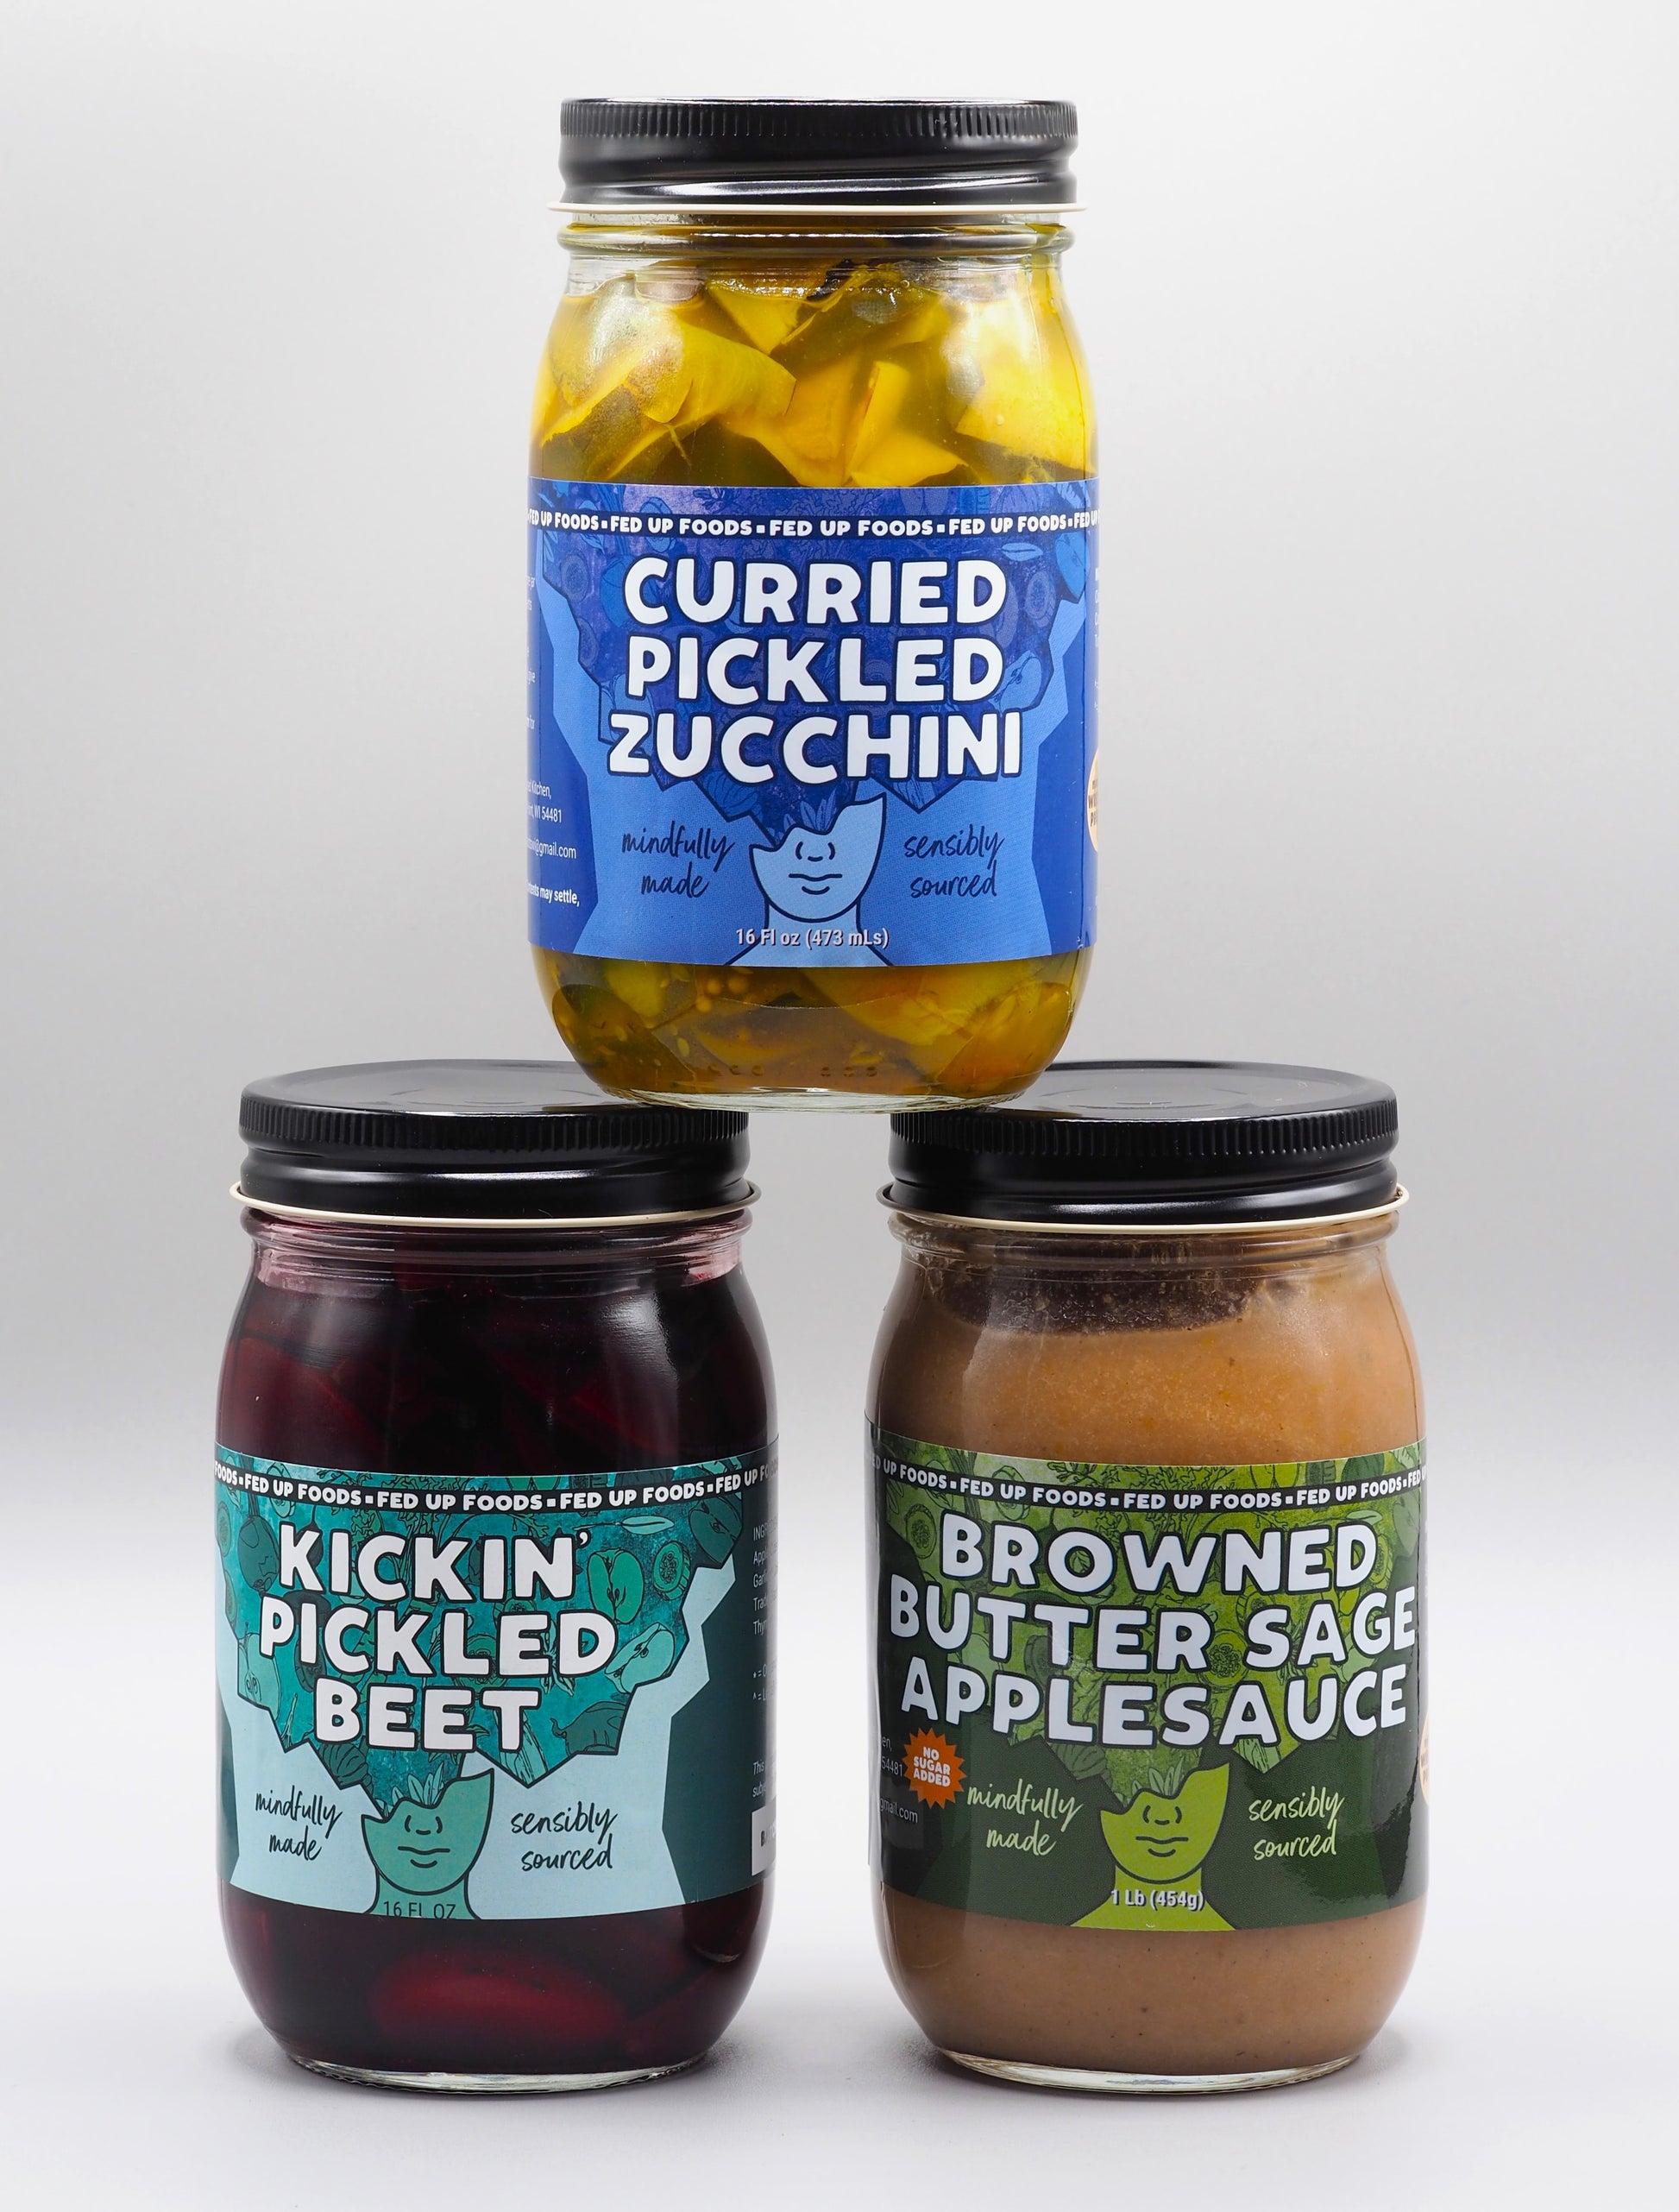 Fed Up Foods Curried Pickled Zucchini kickin pickled beet and browned butter sage applesauce in a 3 pack variety pack